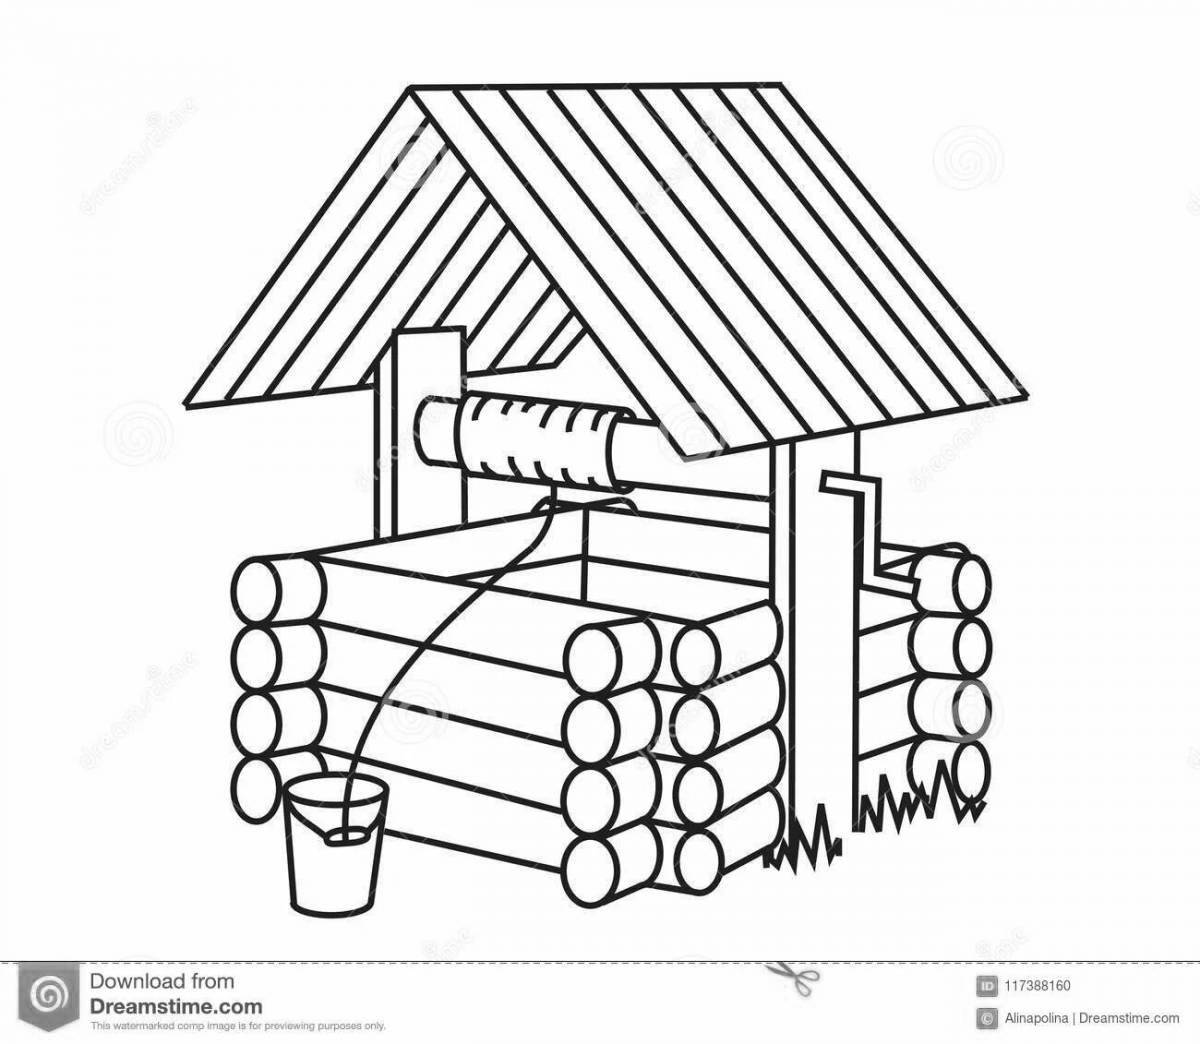 Coloring page gorgeous wooden hut